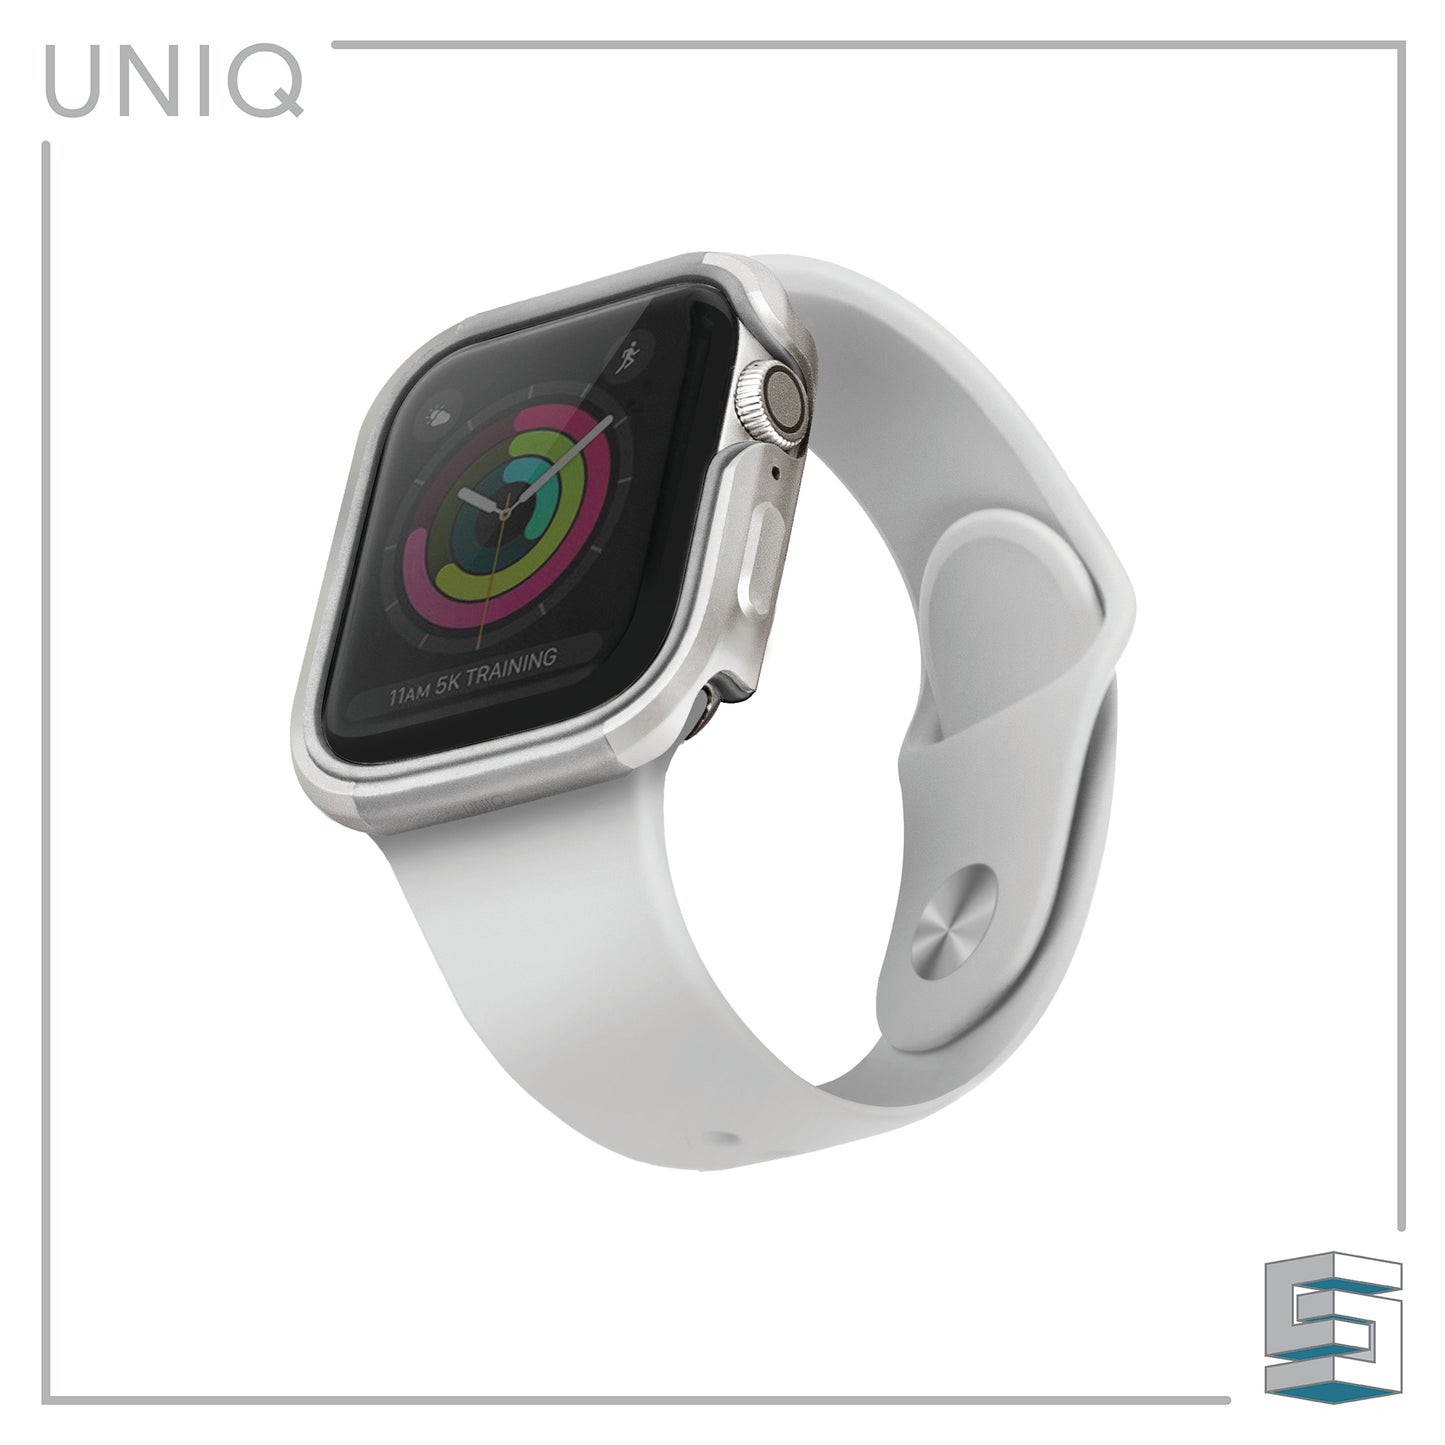 Case for Apple Watch series 6/SE/5/4 - UNIQ Valencia Global Synergy Concepts